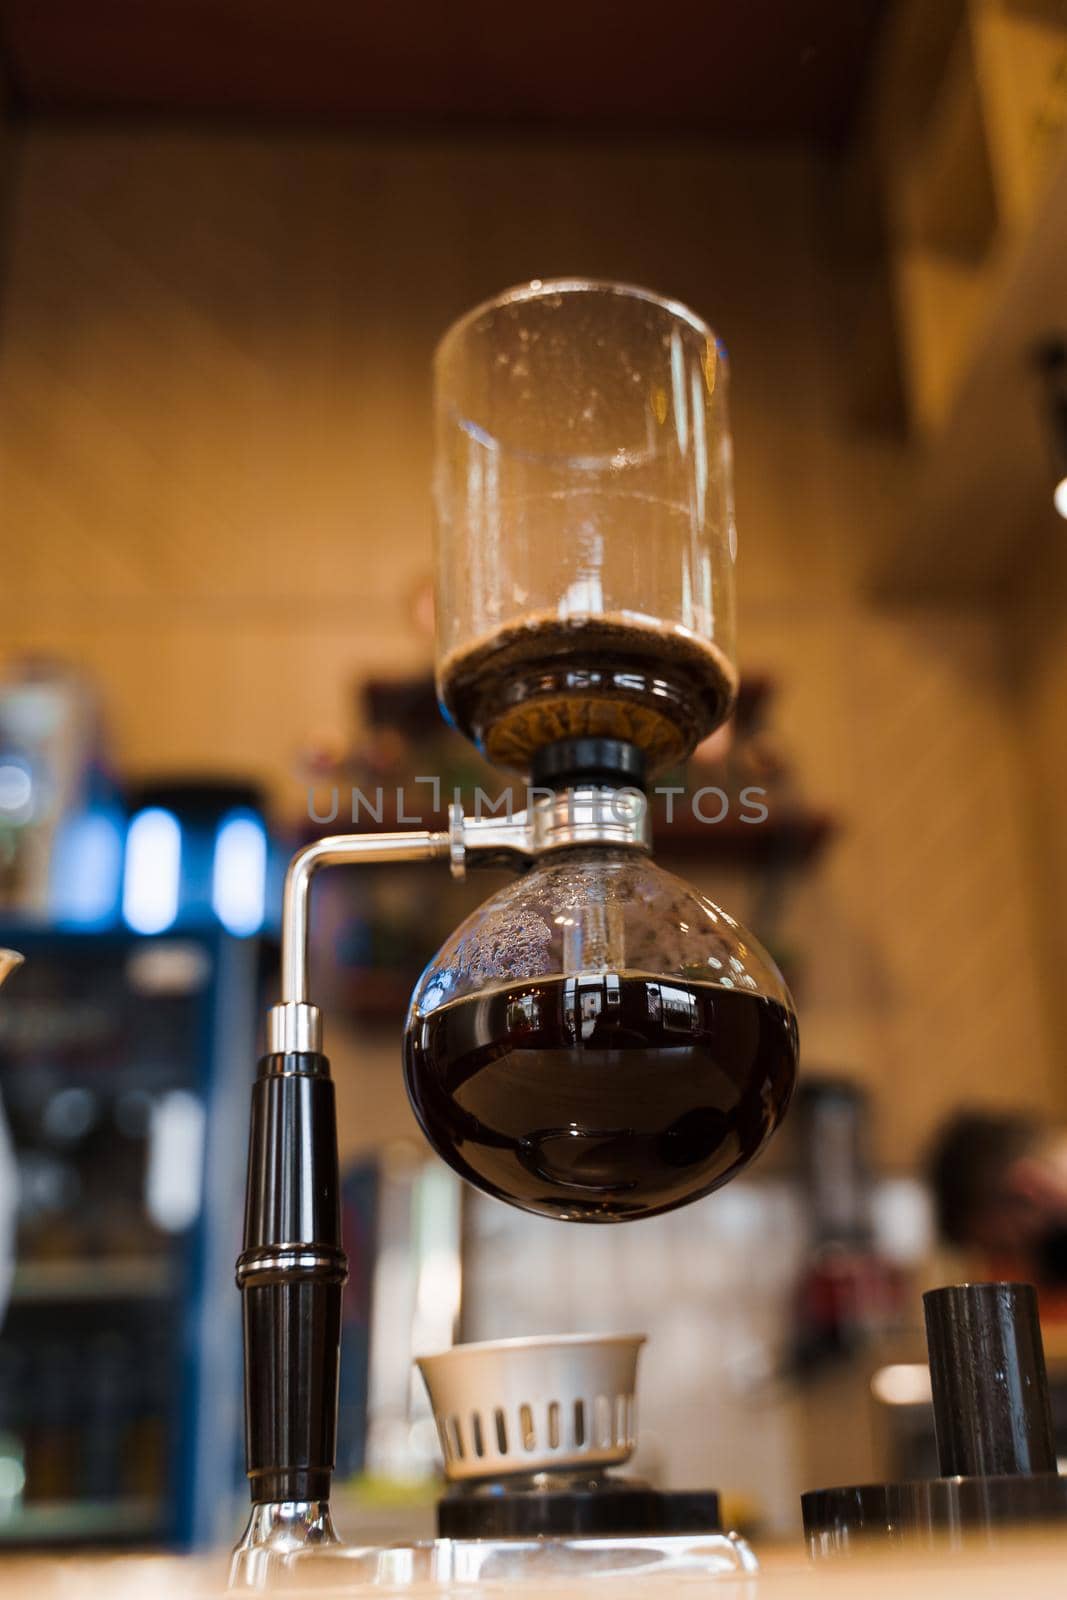 Syphon for coffee brewing in cafe. Coffee brewing syphon alternative method. Advert for social networks for cafe and restaurant.